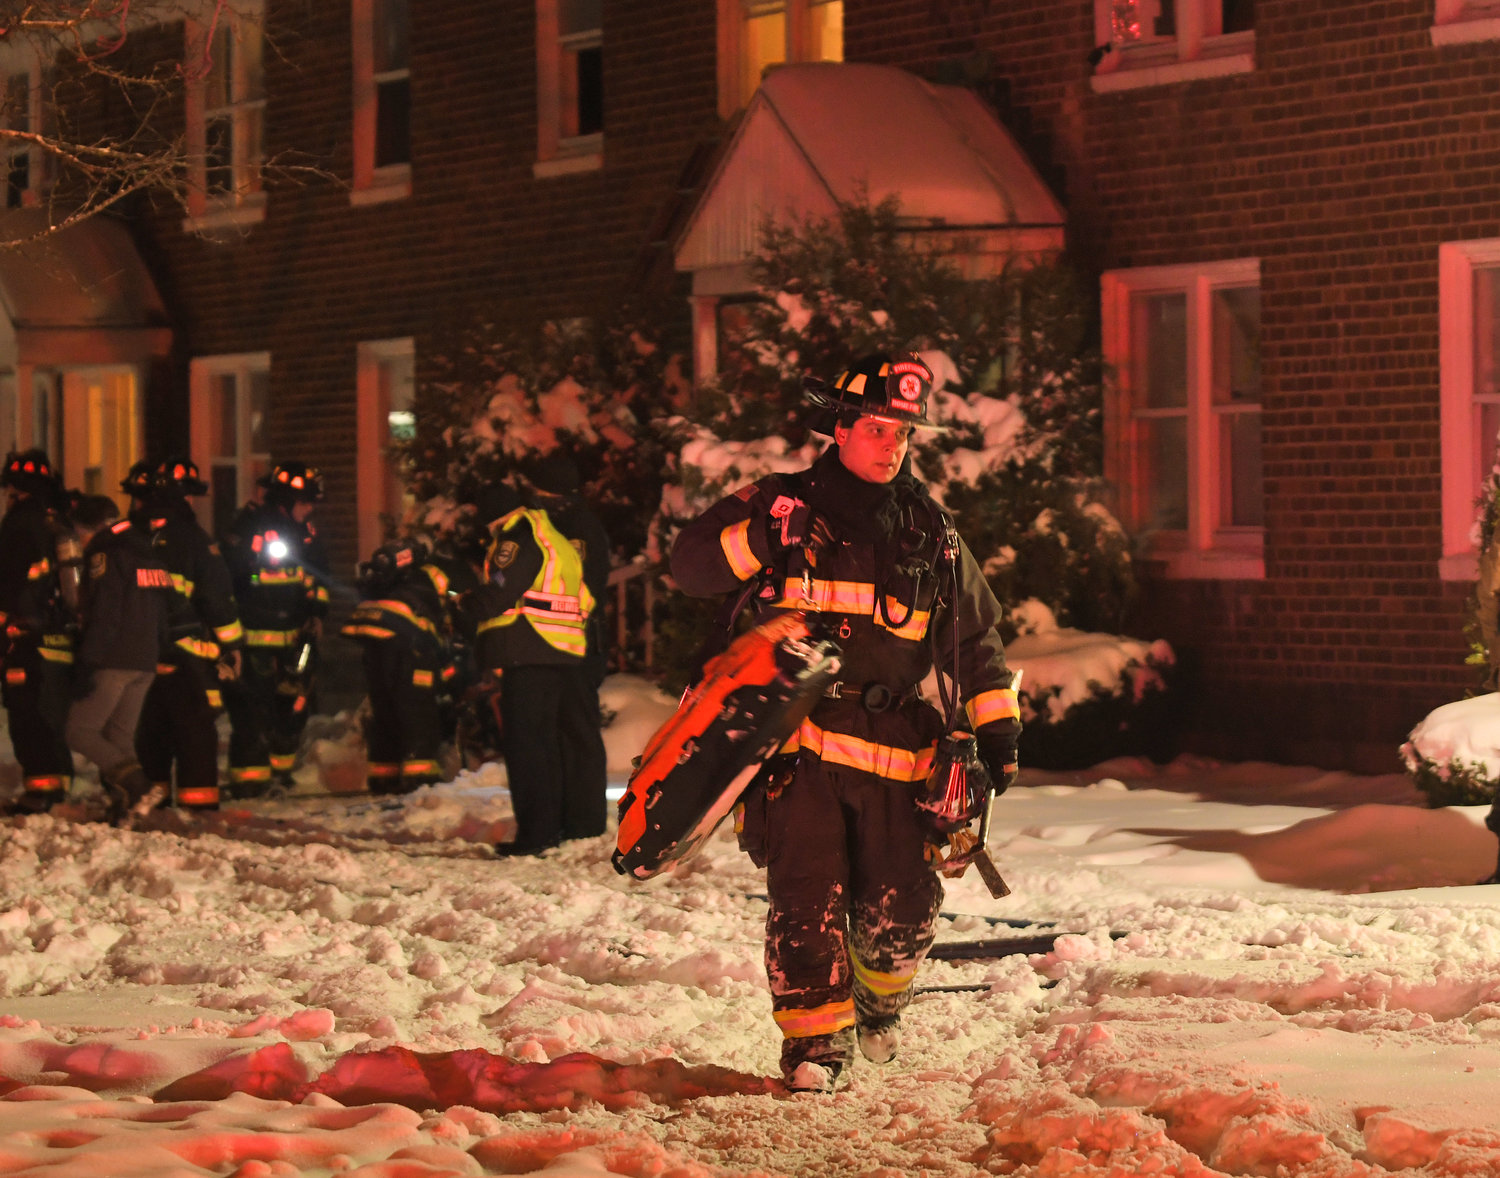 HEADING BACK — Firefighter Joe Fusco brings equipment back from the scene of a fire at an apartment complex on East Bloomfield Street to his rig on Sunday night. One man was treated for smoke inhalation. The fire was contained to one apartment, however some other apartments in the building suffered smoke damage.